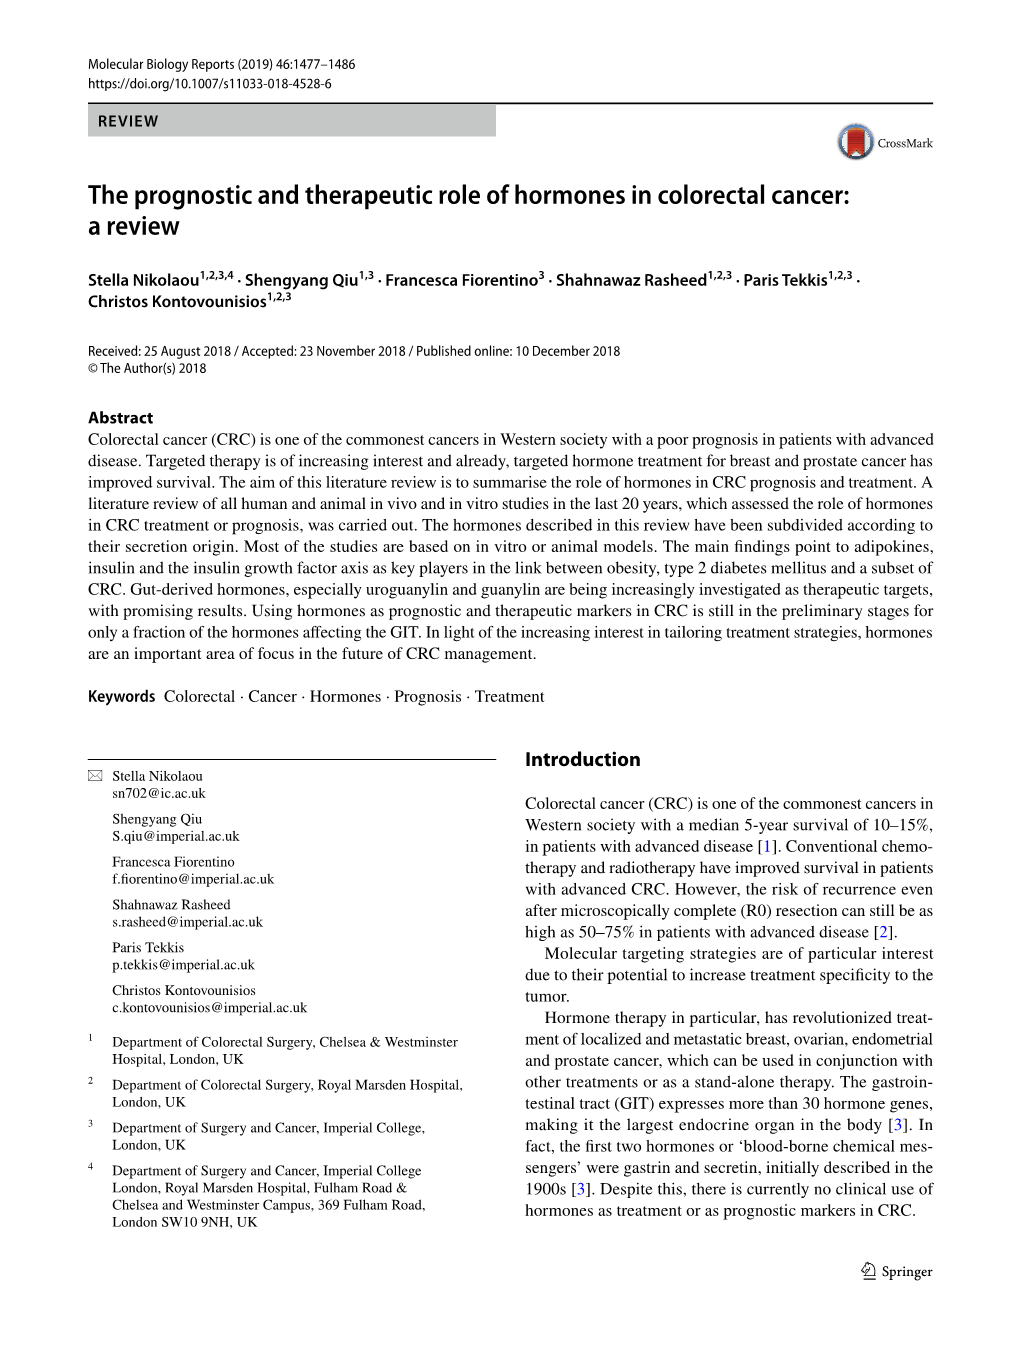 The Prognostic and Therapeutic Role of Hormones in Colorectal Cancer: a Review